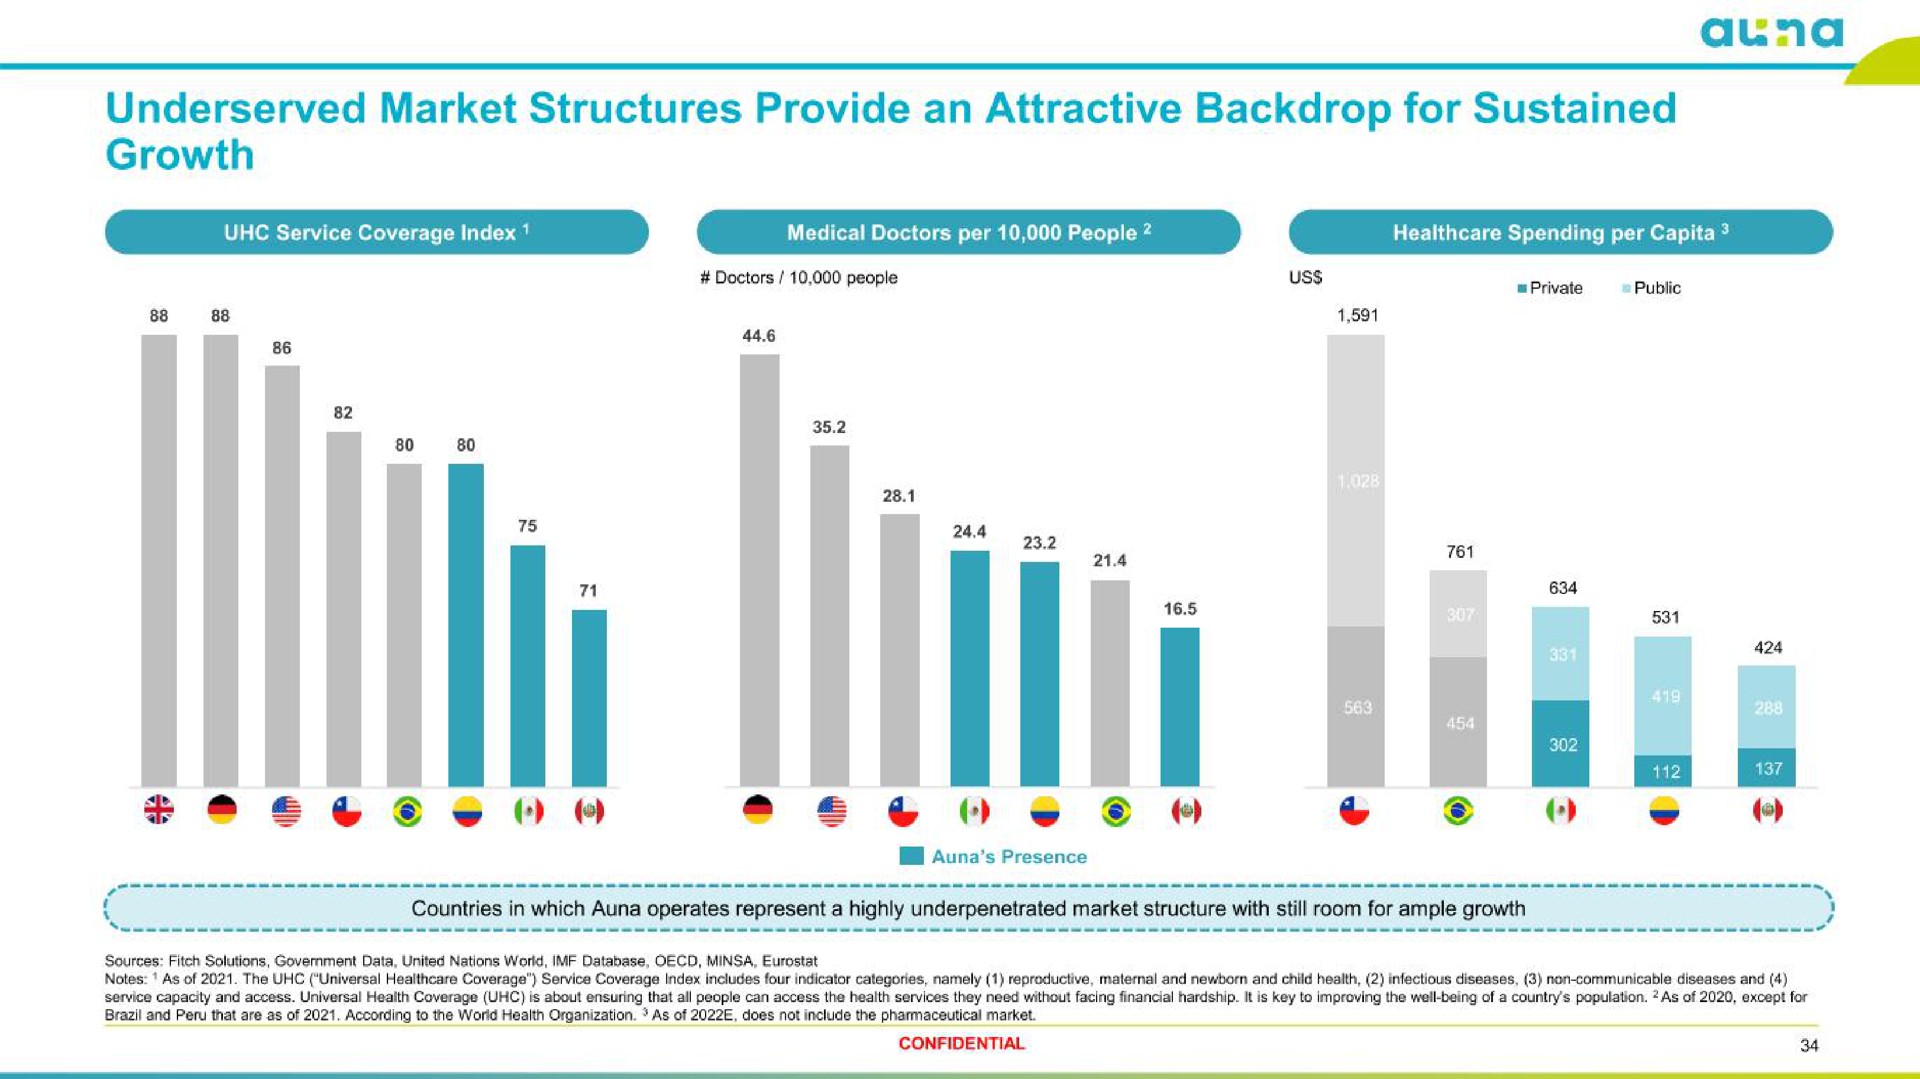 market structures provide an attractive backdrop for sustained growth a owe | Auna SA